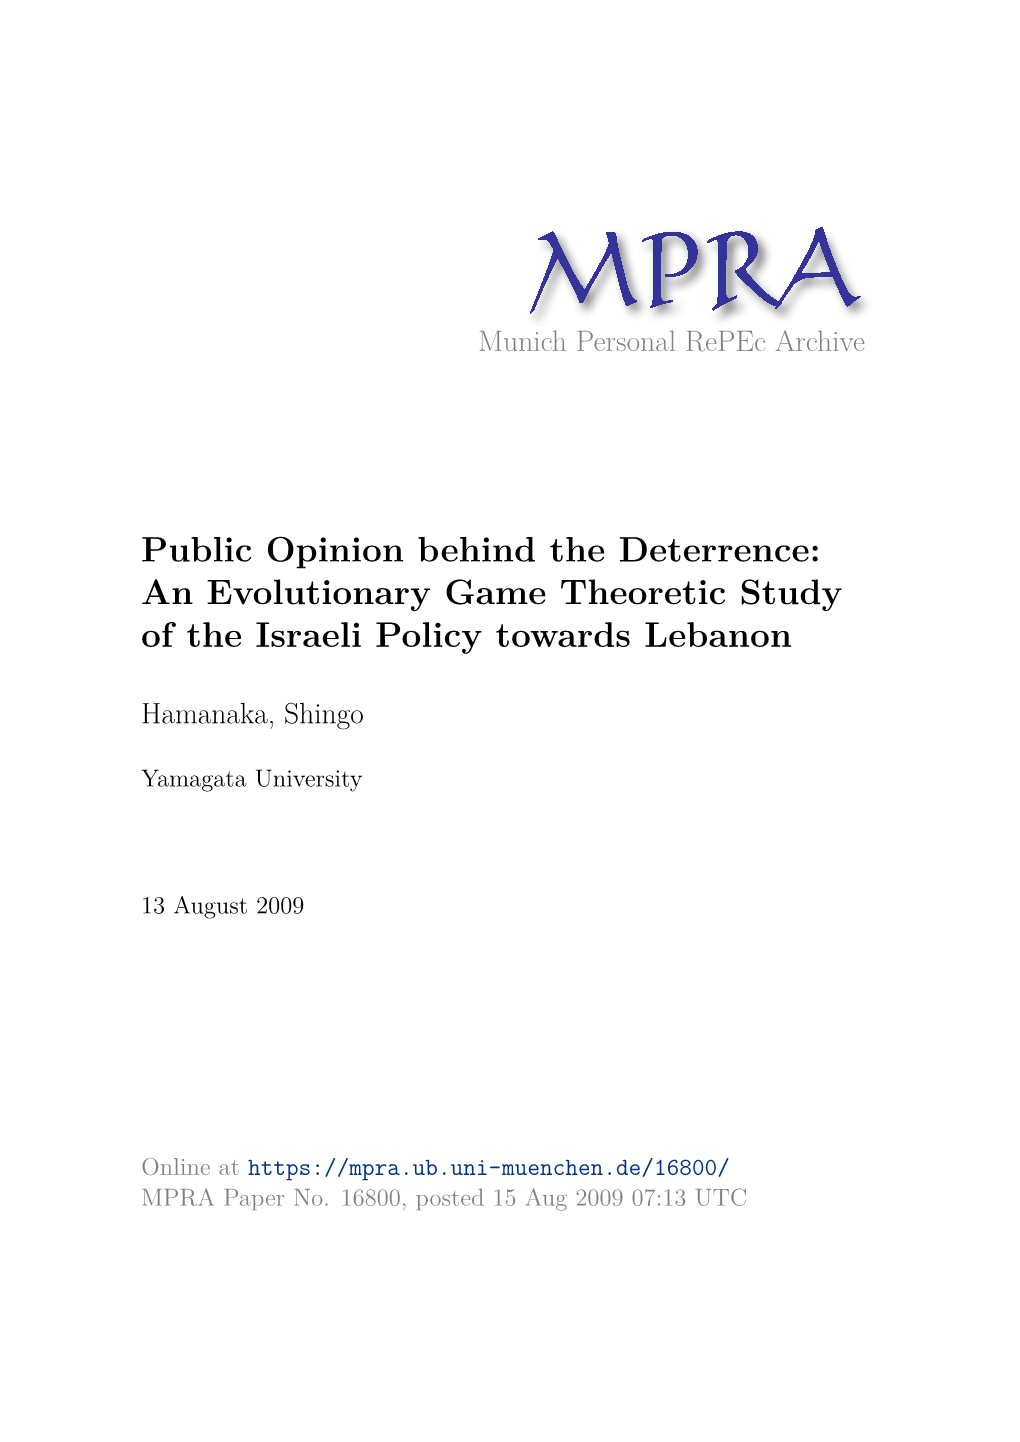 Public Opinion Behind the Deterrence: an Evolutionary Game Theoretic Study of the Israeli Policy Towards Lebanon